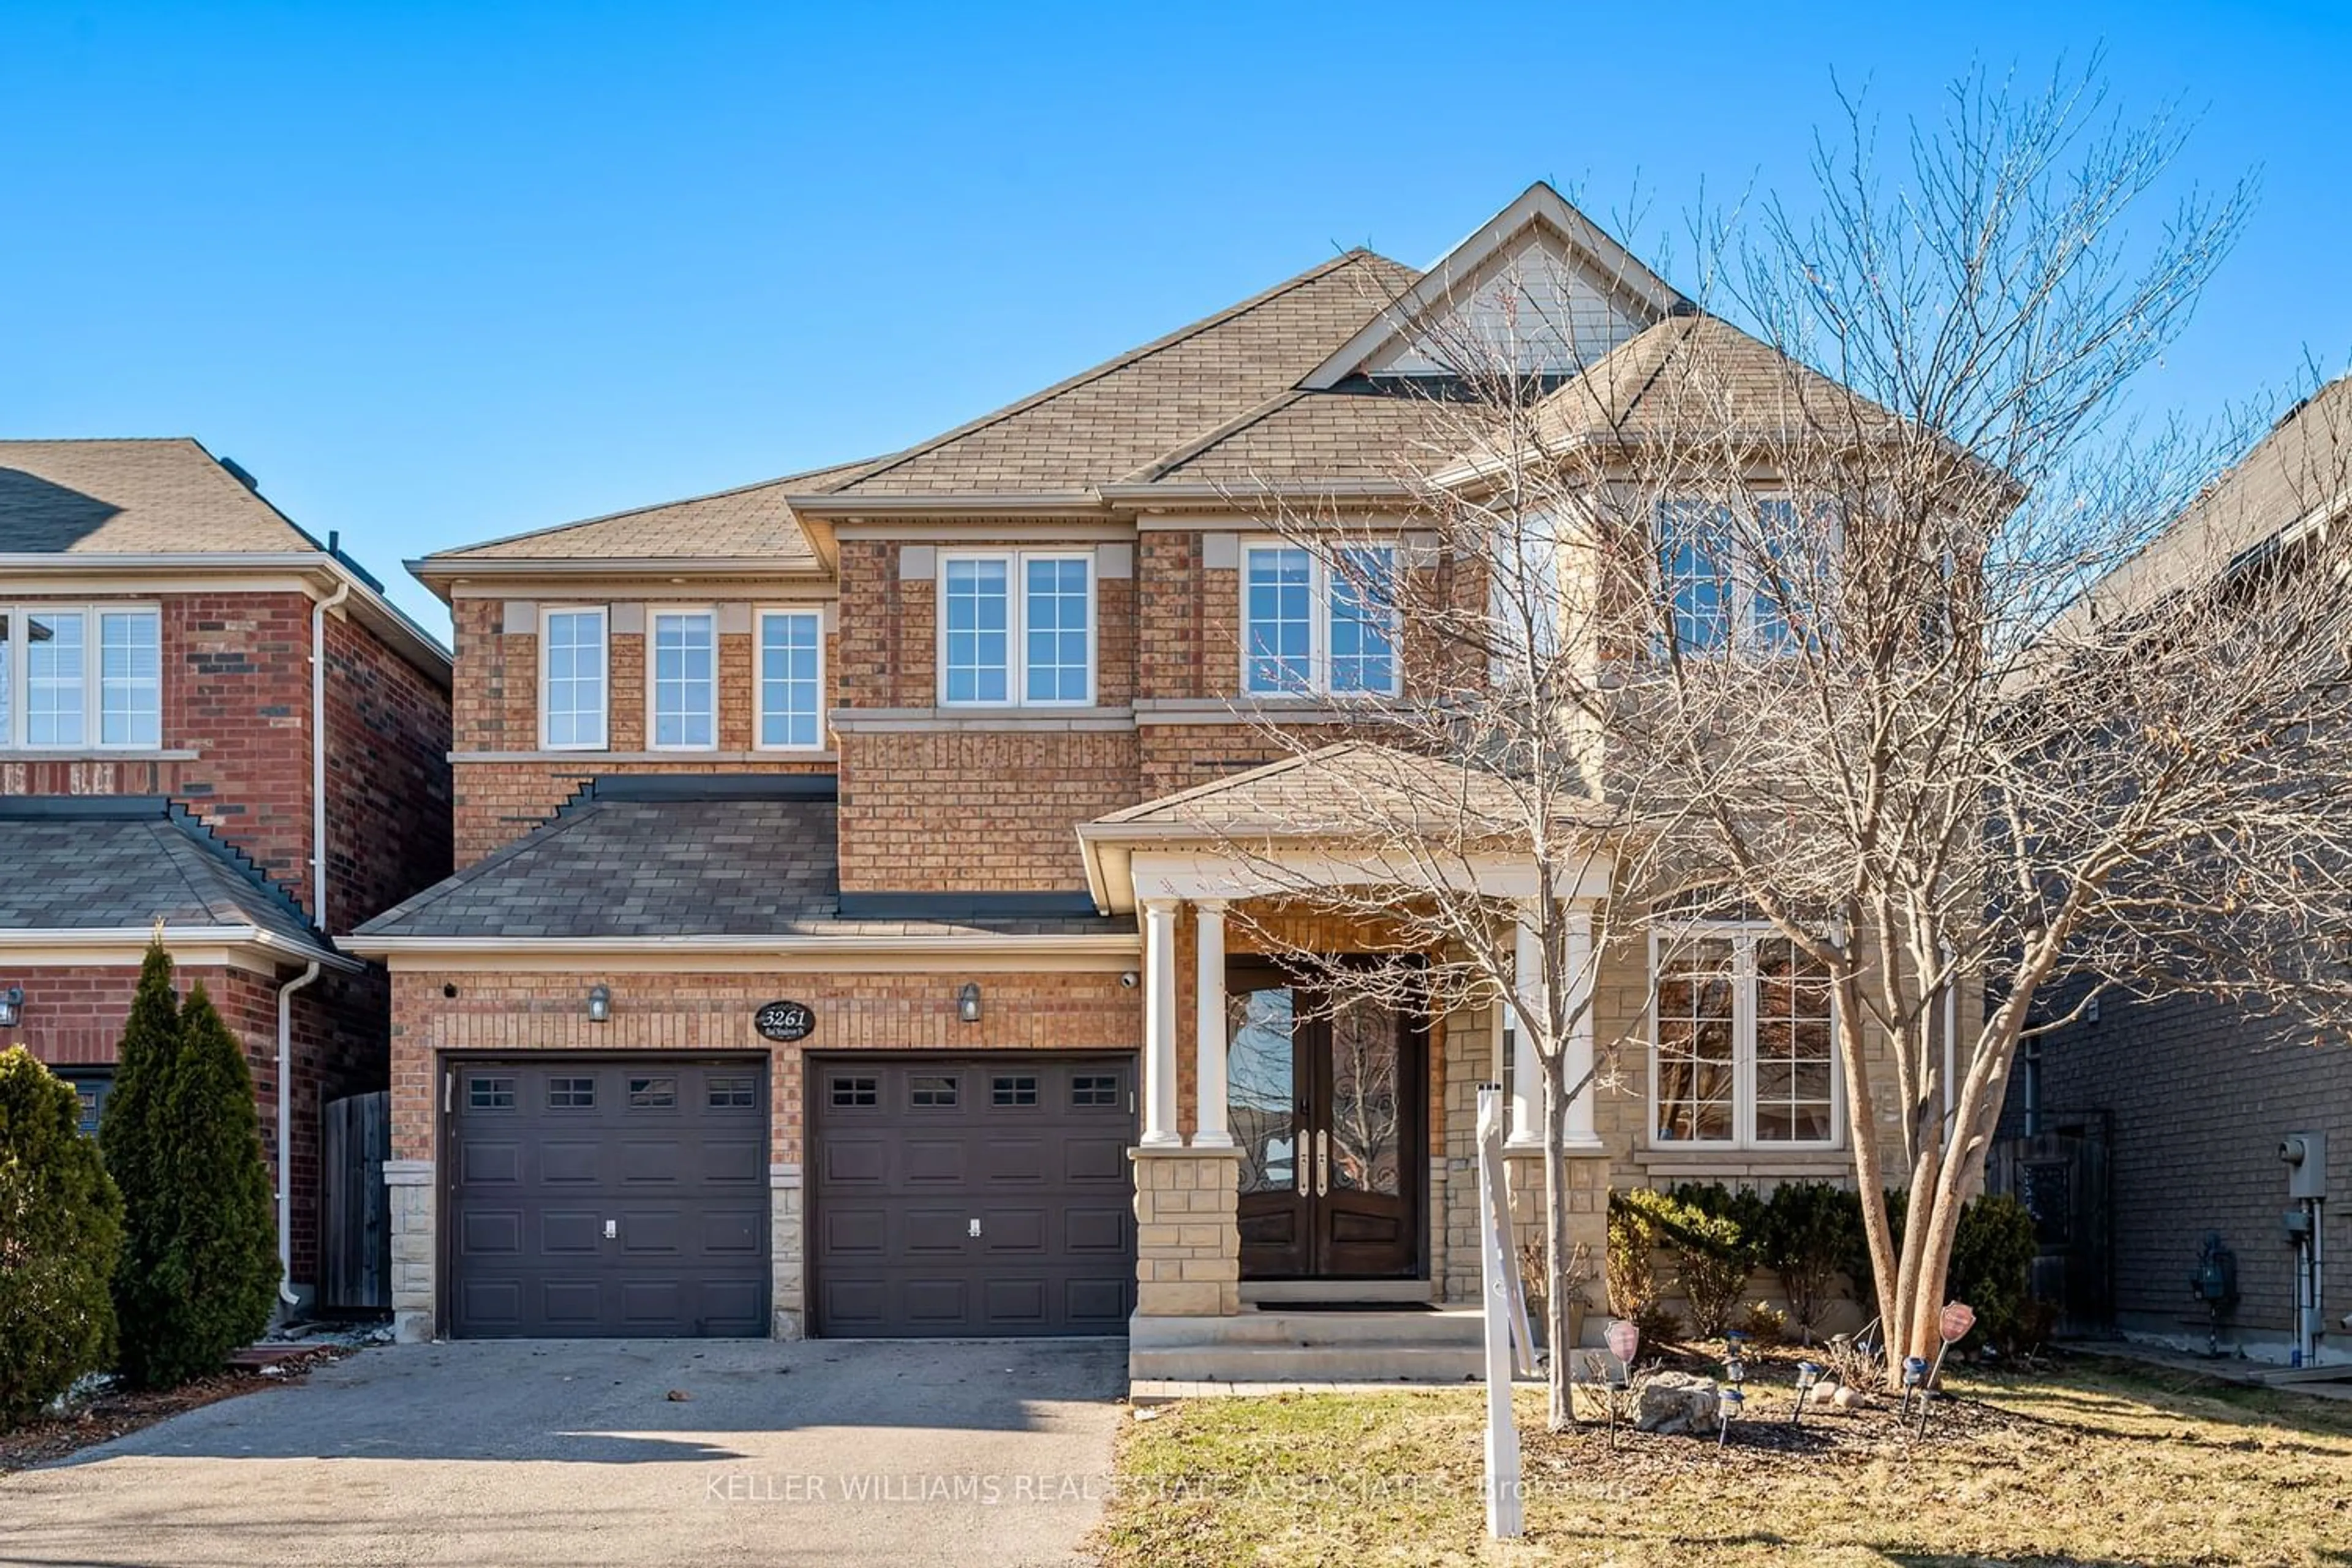 Home with brick exterior material for 3261 Paul Henderson Dr, Mississauga Ontario L5M 0H5